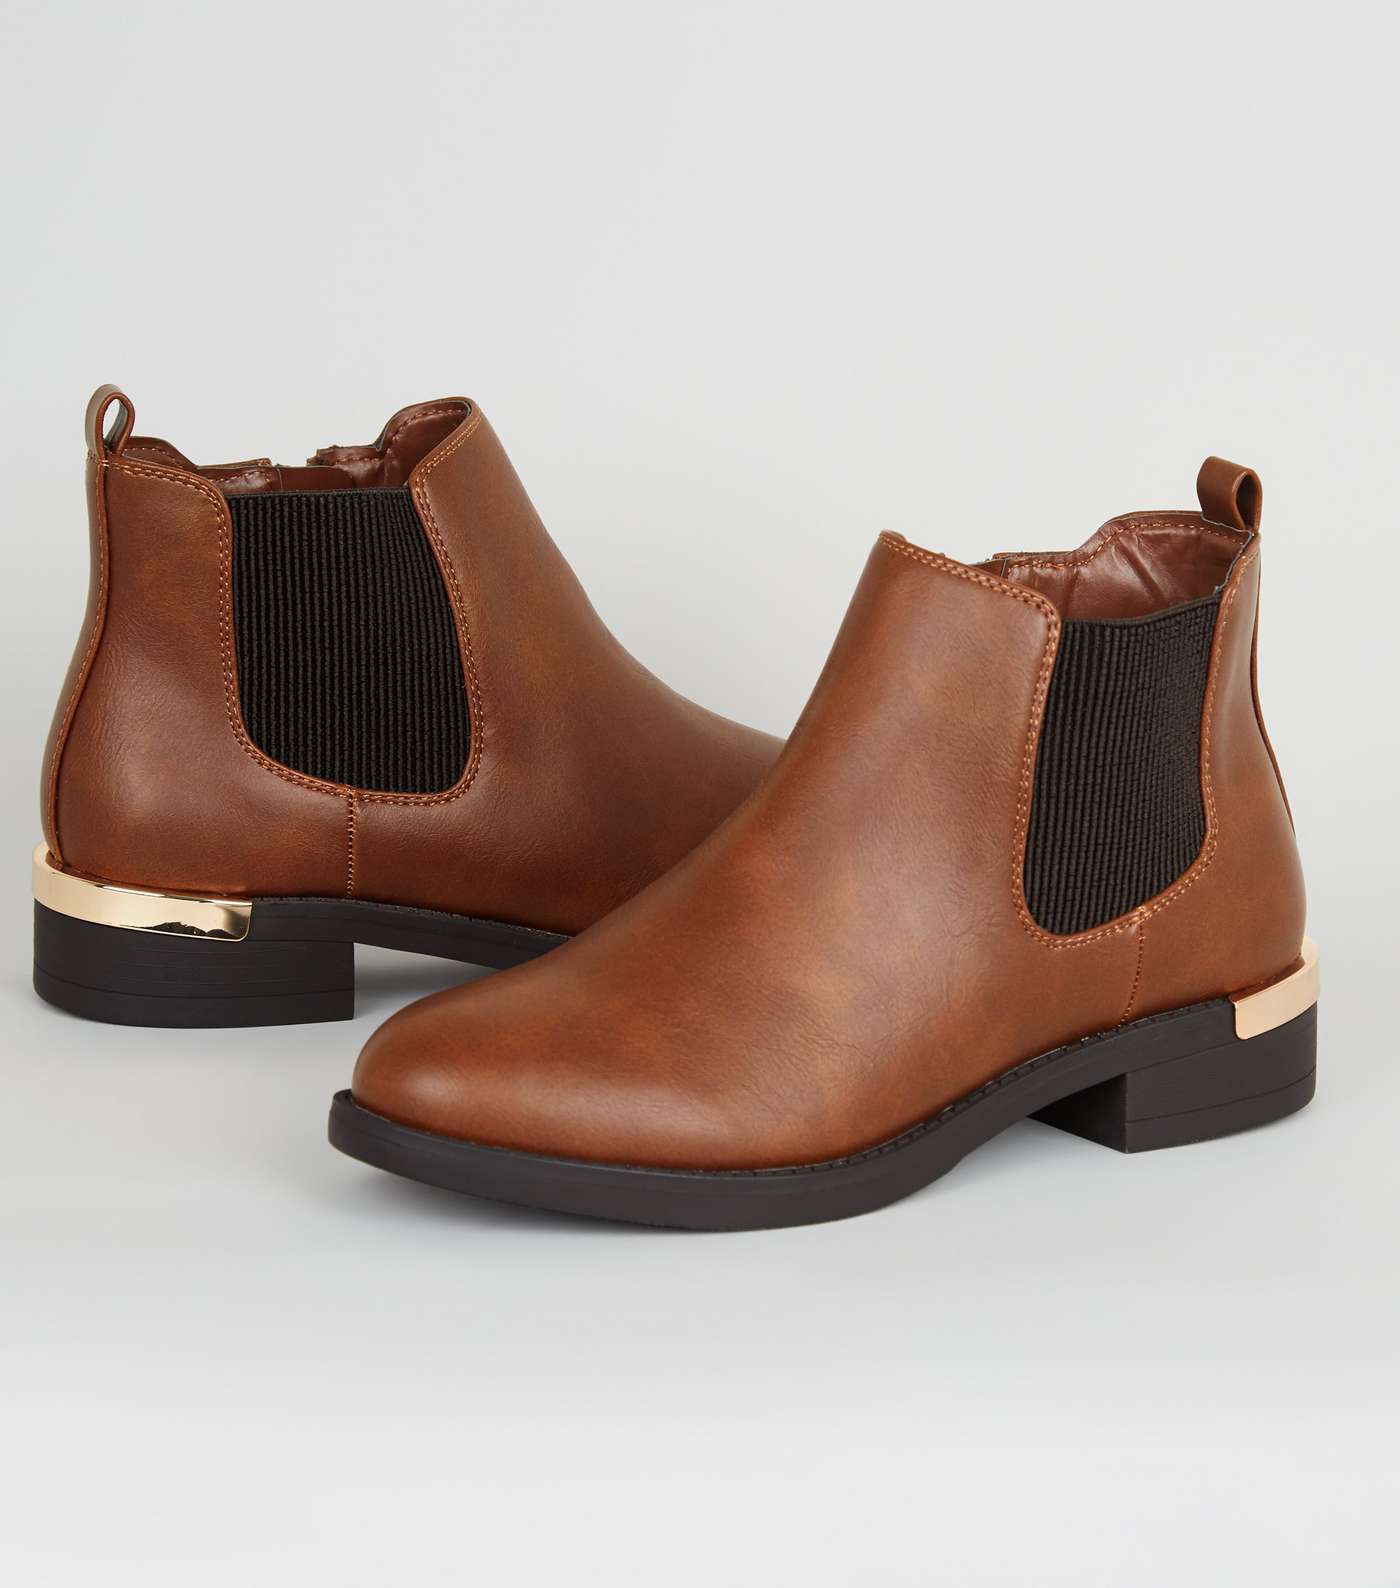 Girls Tan Leather-Look Chelsea Boots Image 3